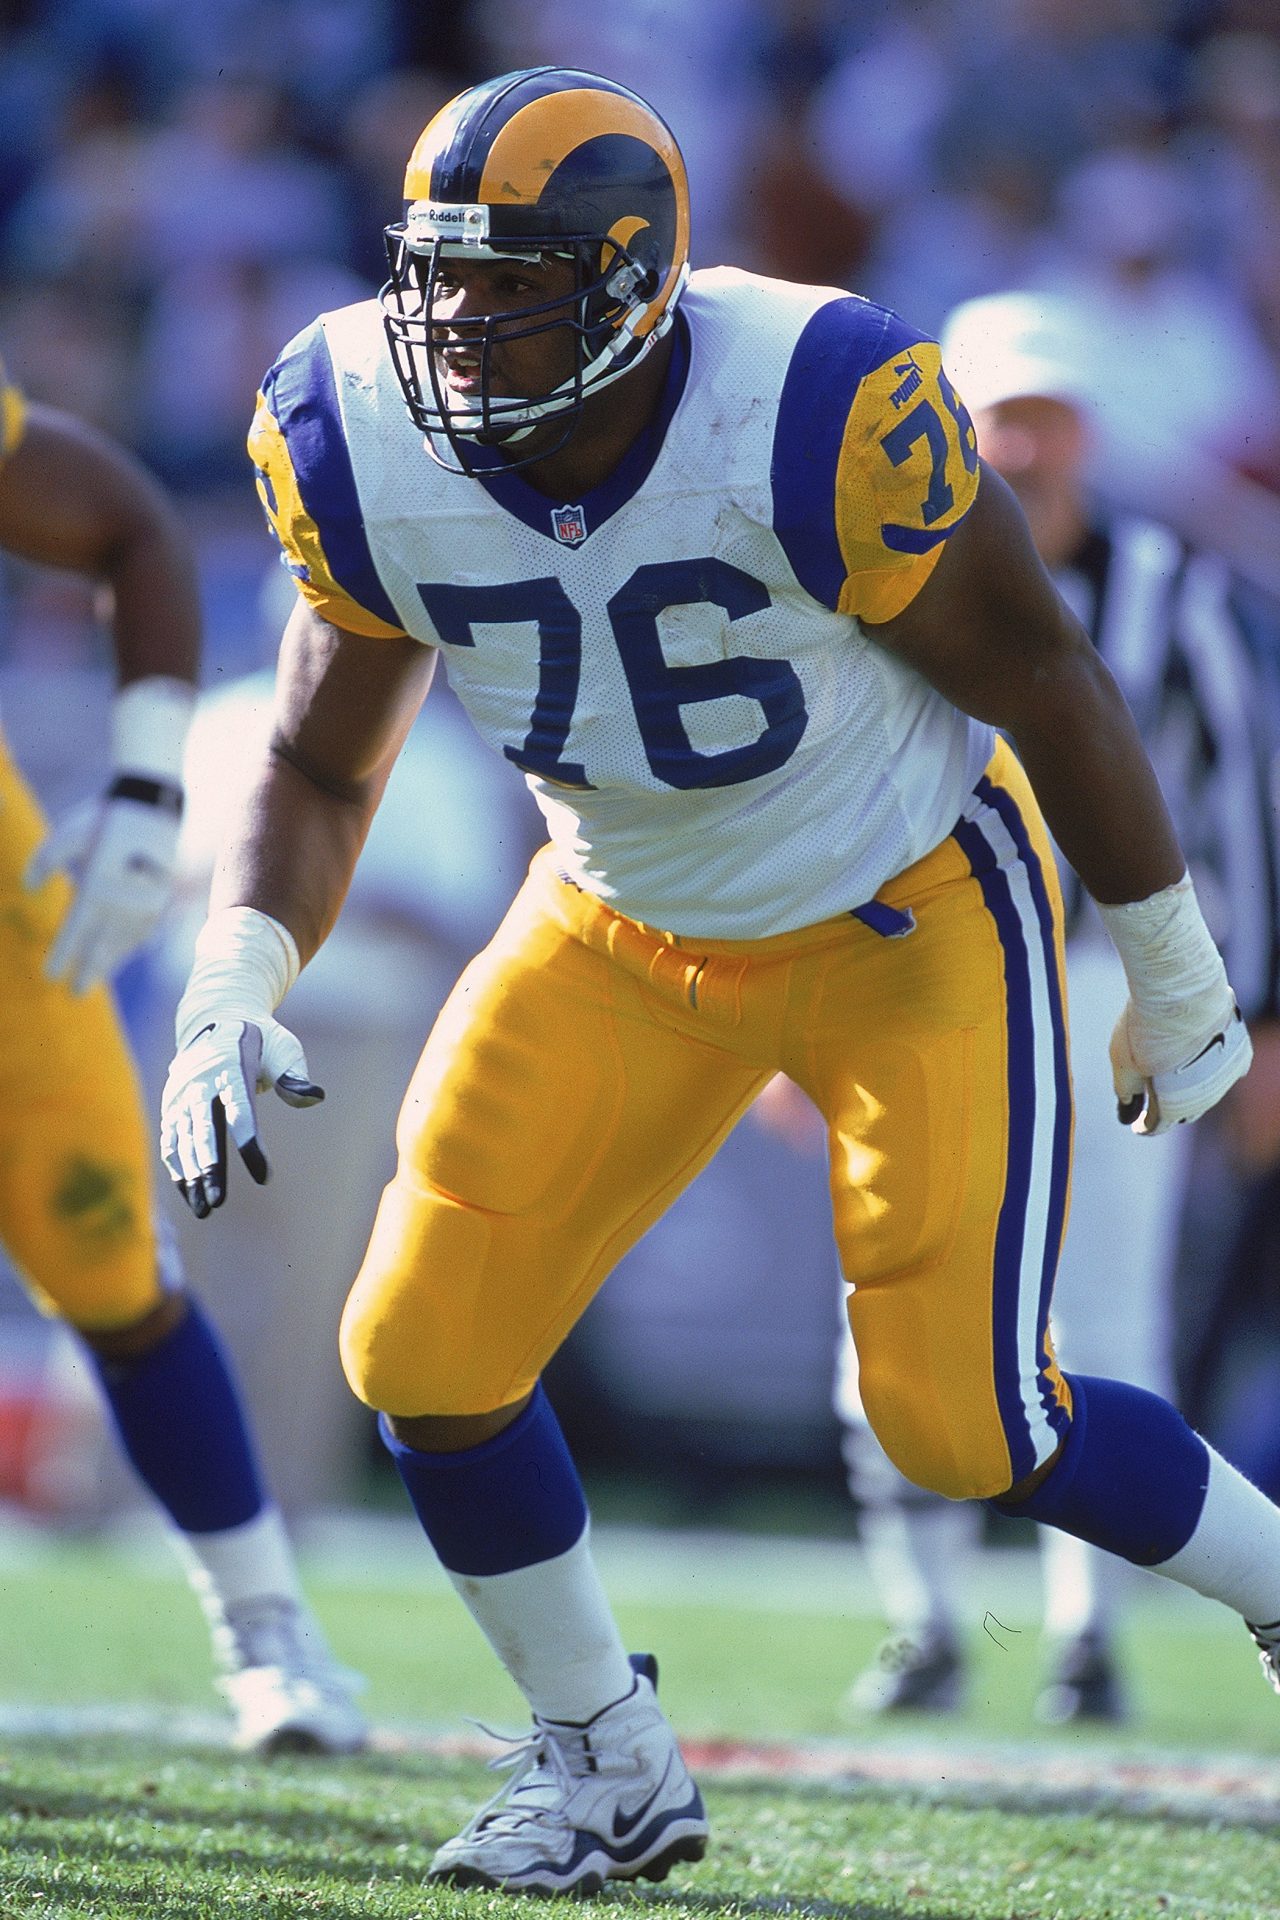 1997: St. Louis Rams Select Orlando Pace